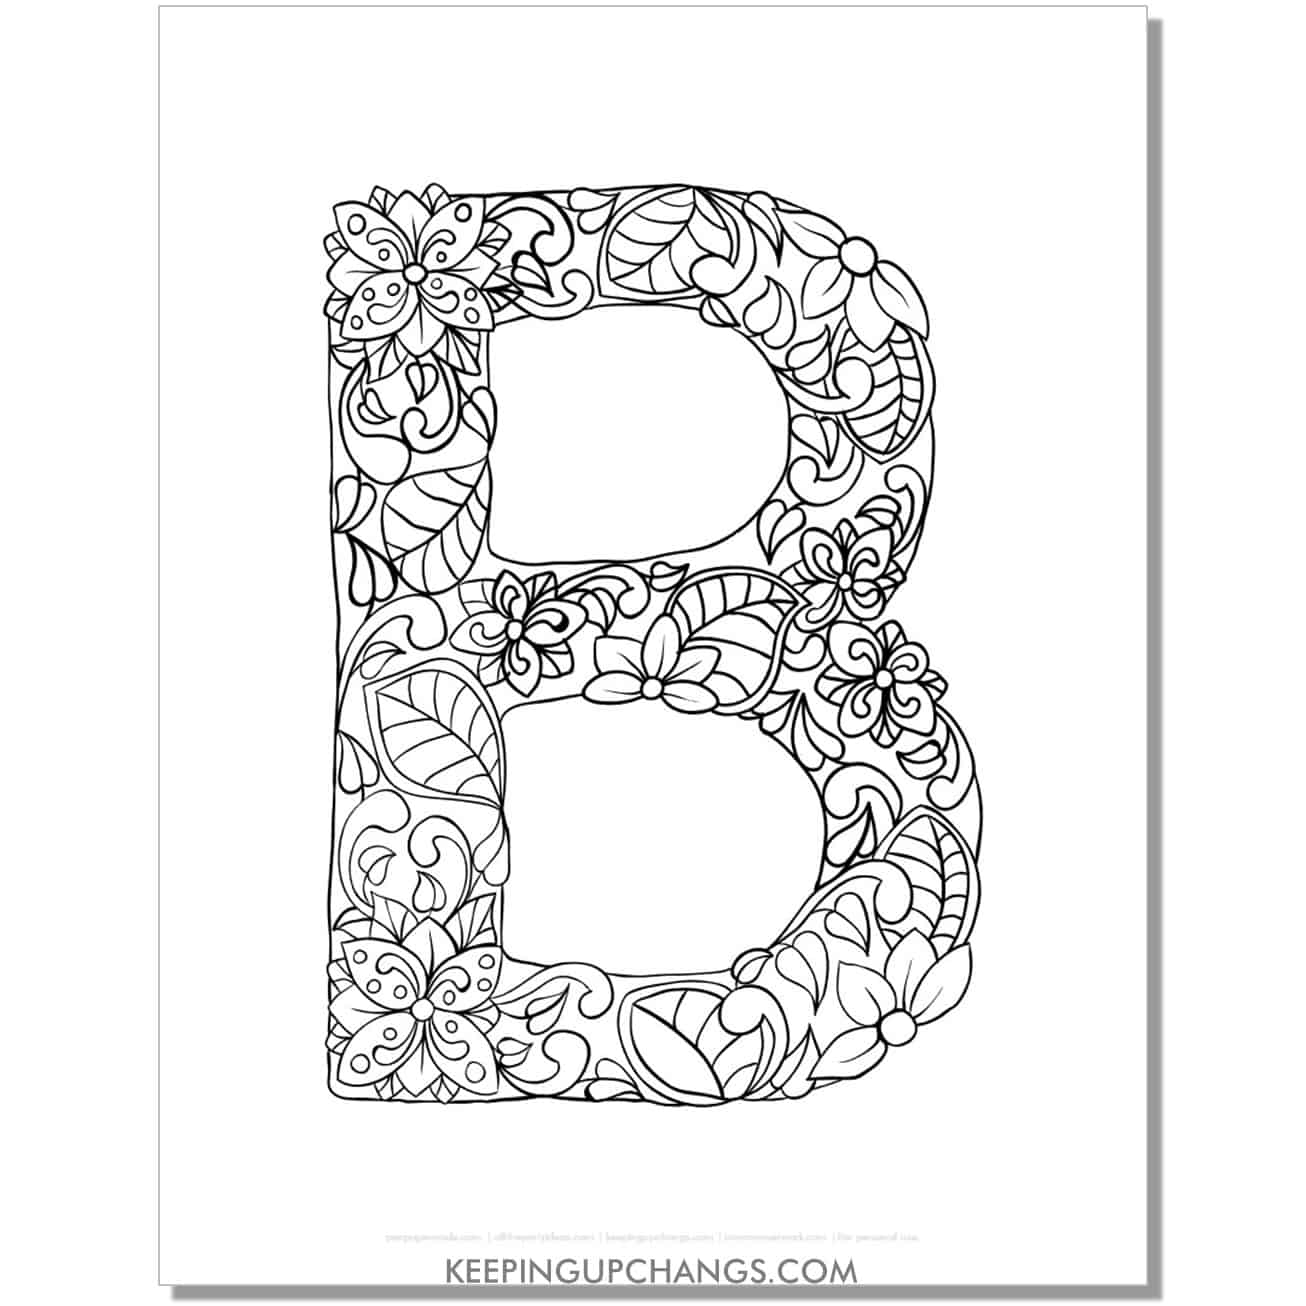 free abc b to color, complicated mandala zentangle for adults.